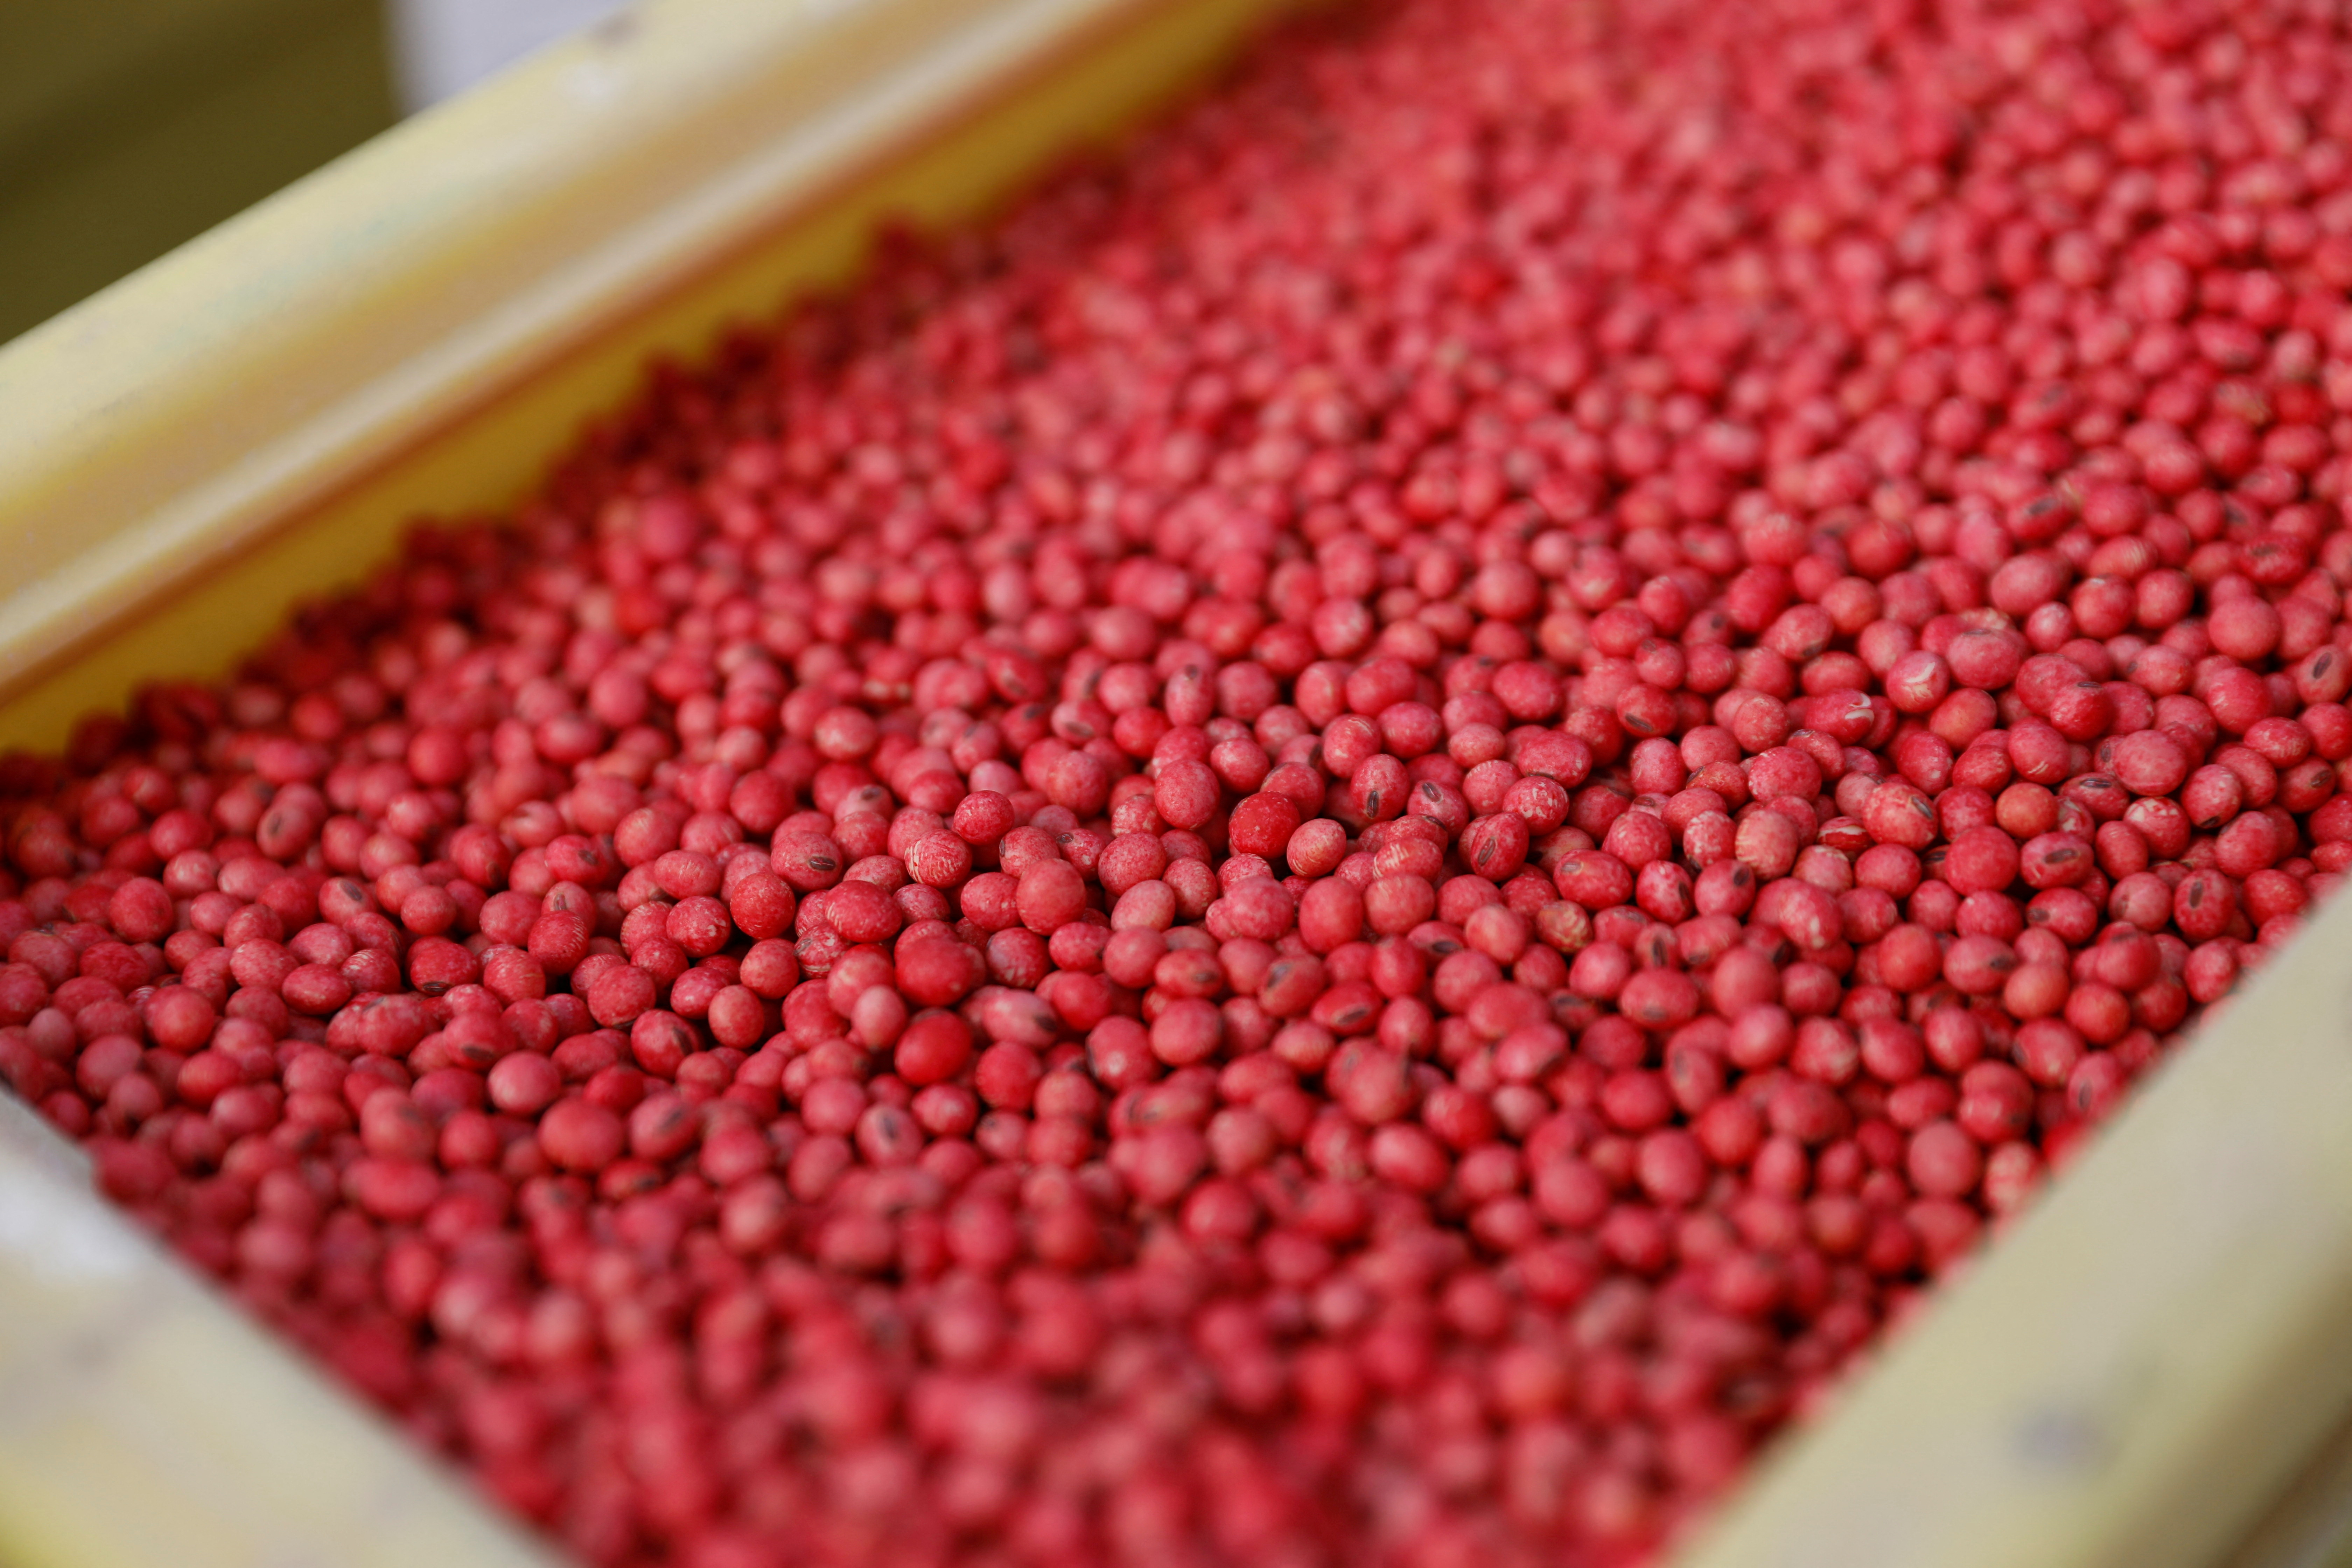 Soy bean seeds are seen in a container at a farm in Gideon, Missouri